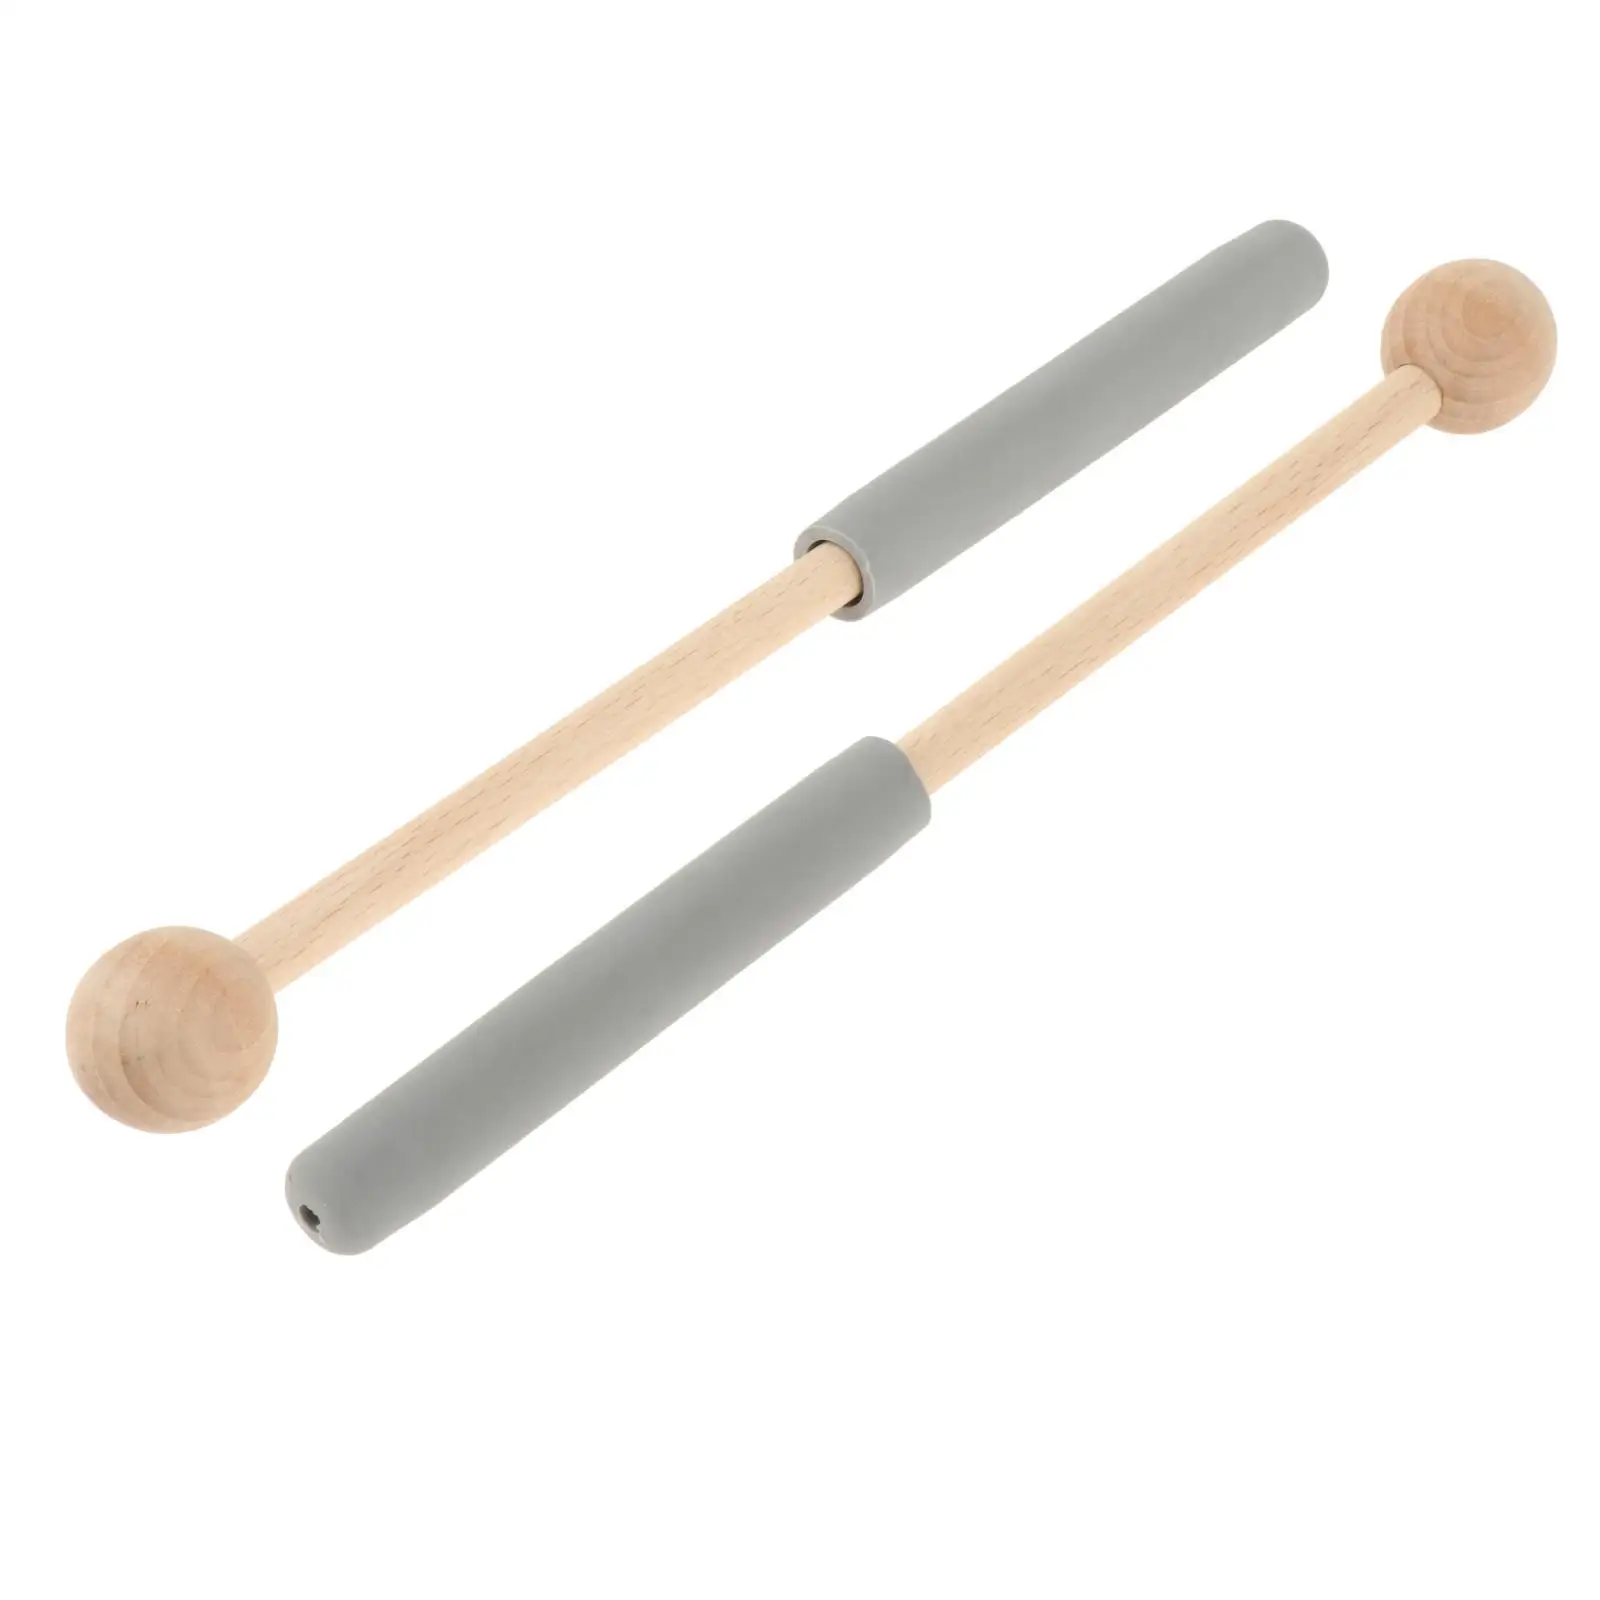 Wooden Marimba Mallets Xylophone Percussion Bell Non Slip Handle Wooden Head Professional